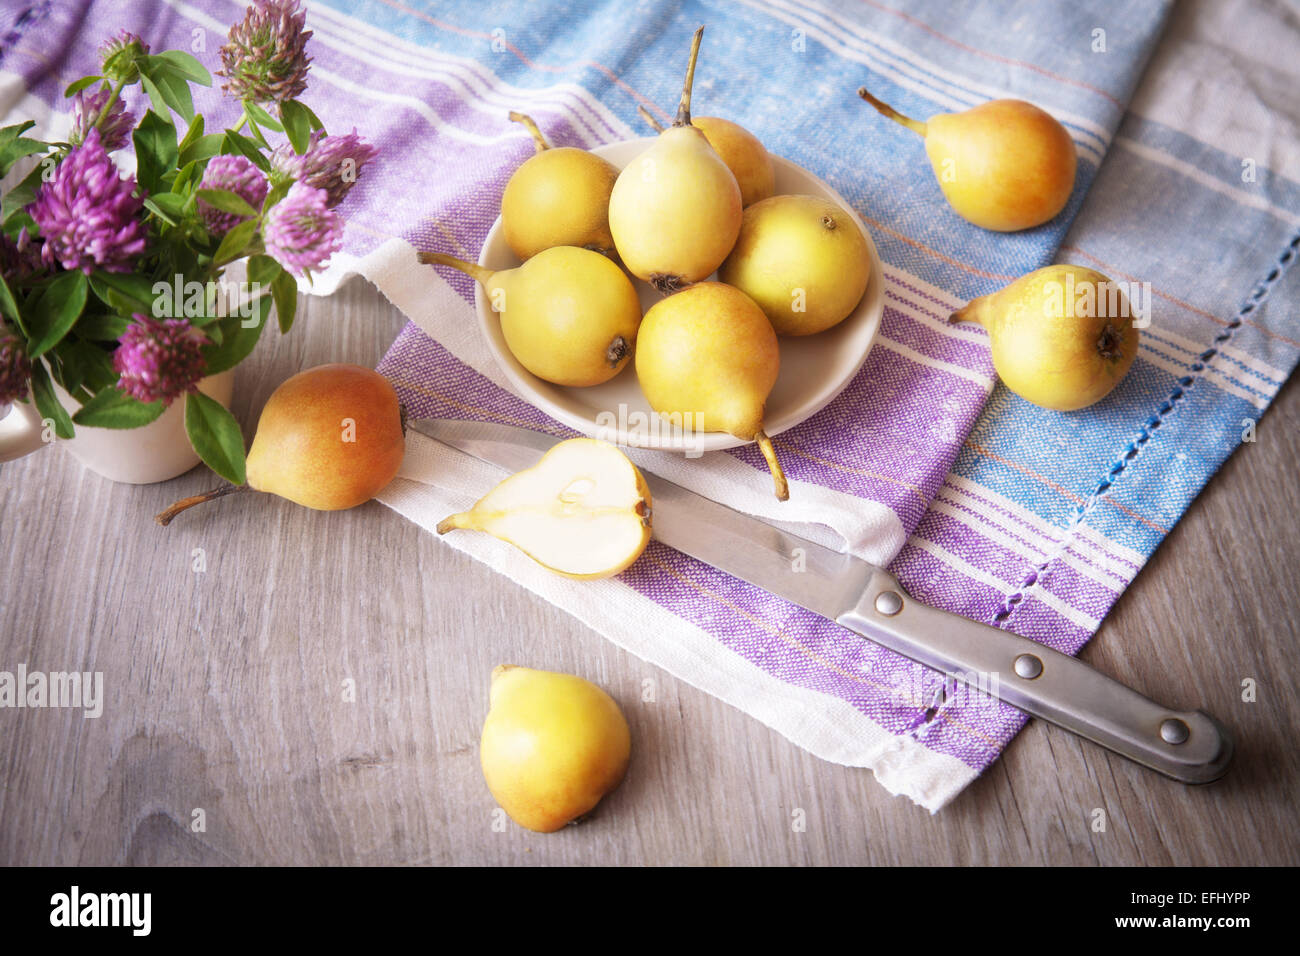 Still life with pears and flowers Stock Photo